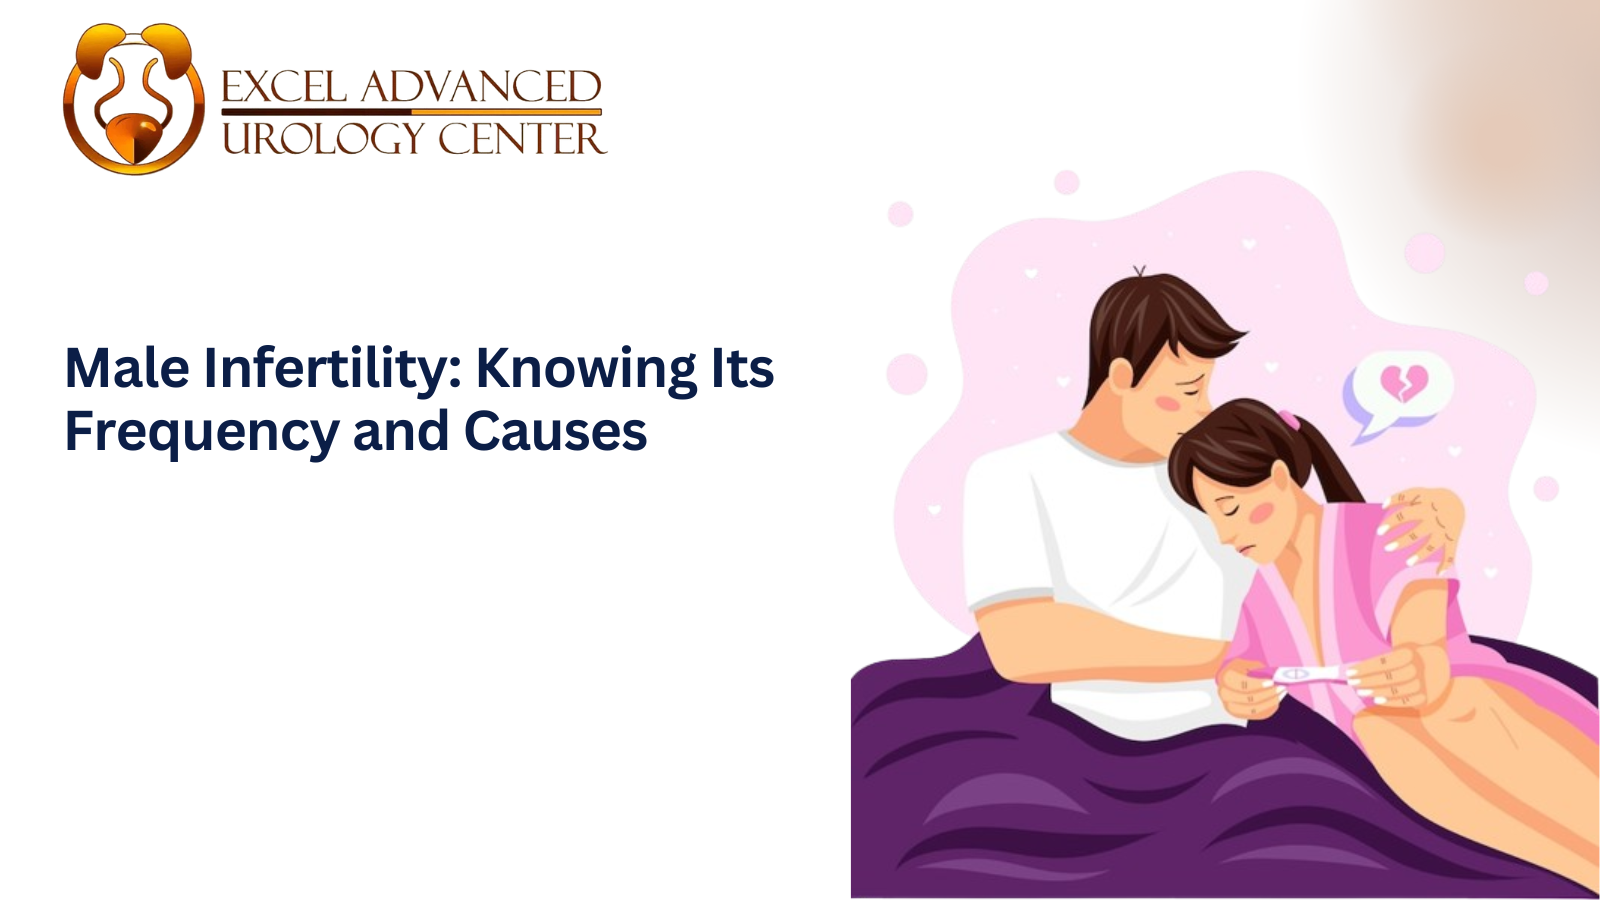 Male Infertility: Knowing Its Frequency and Causes